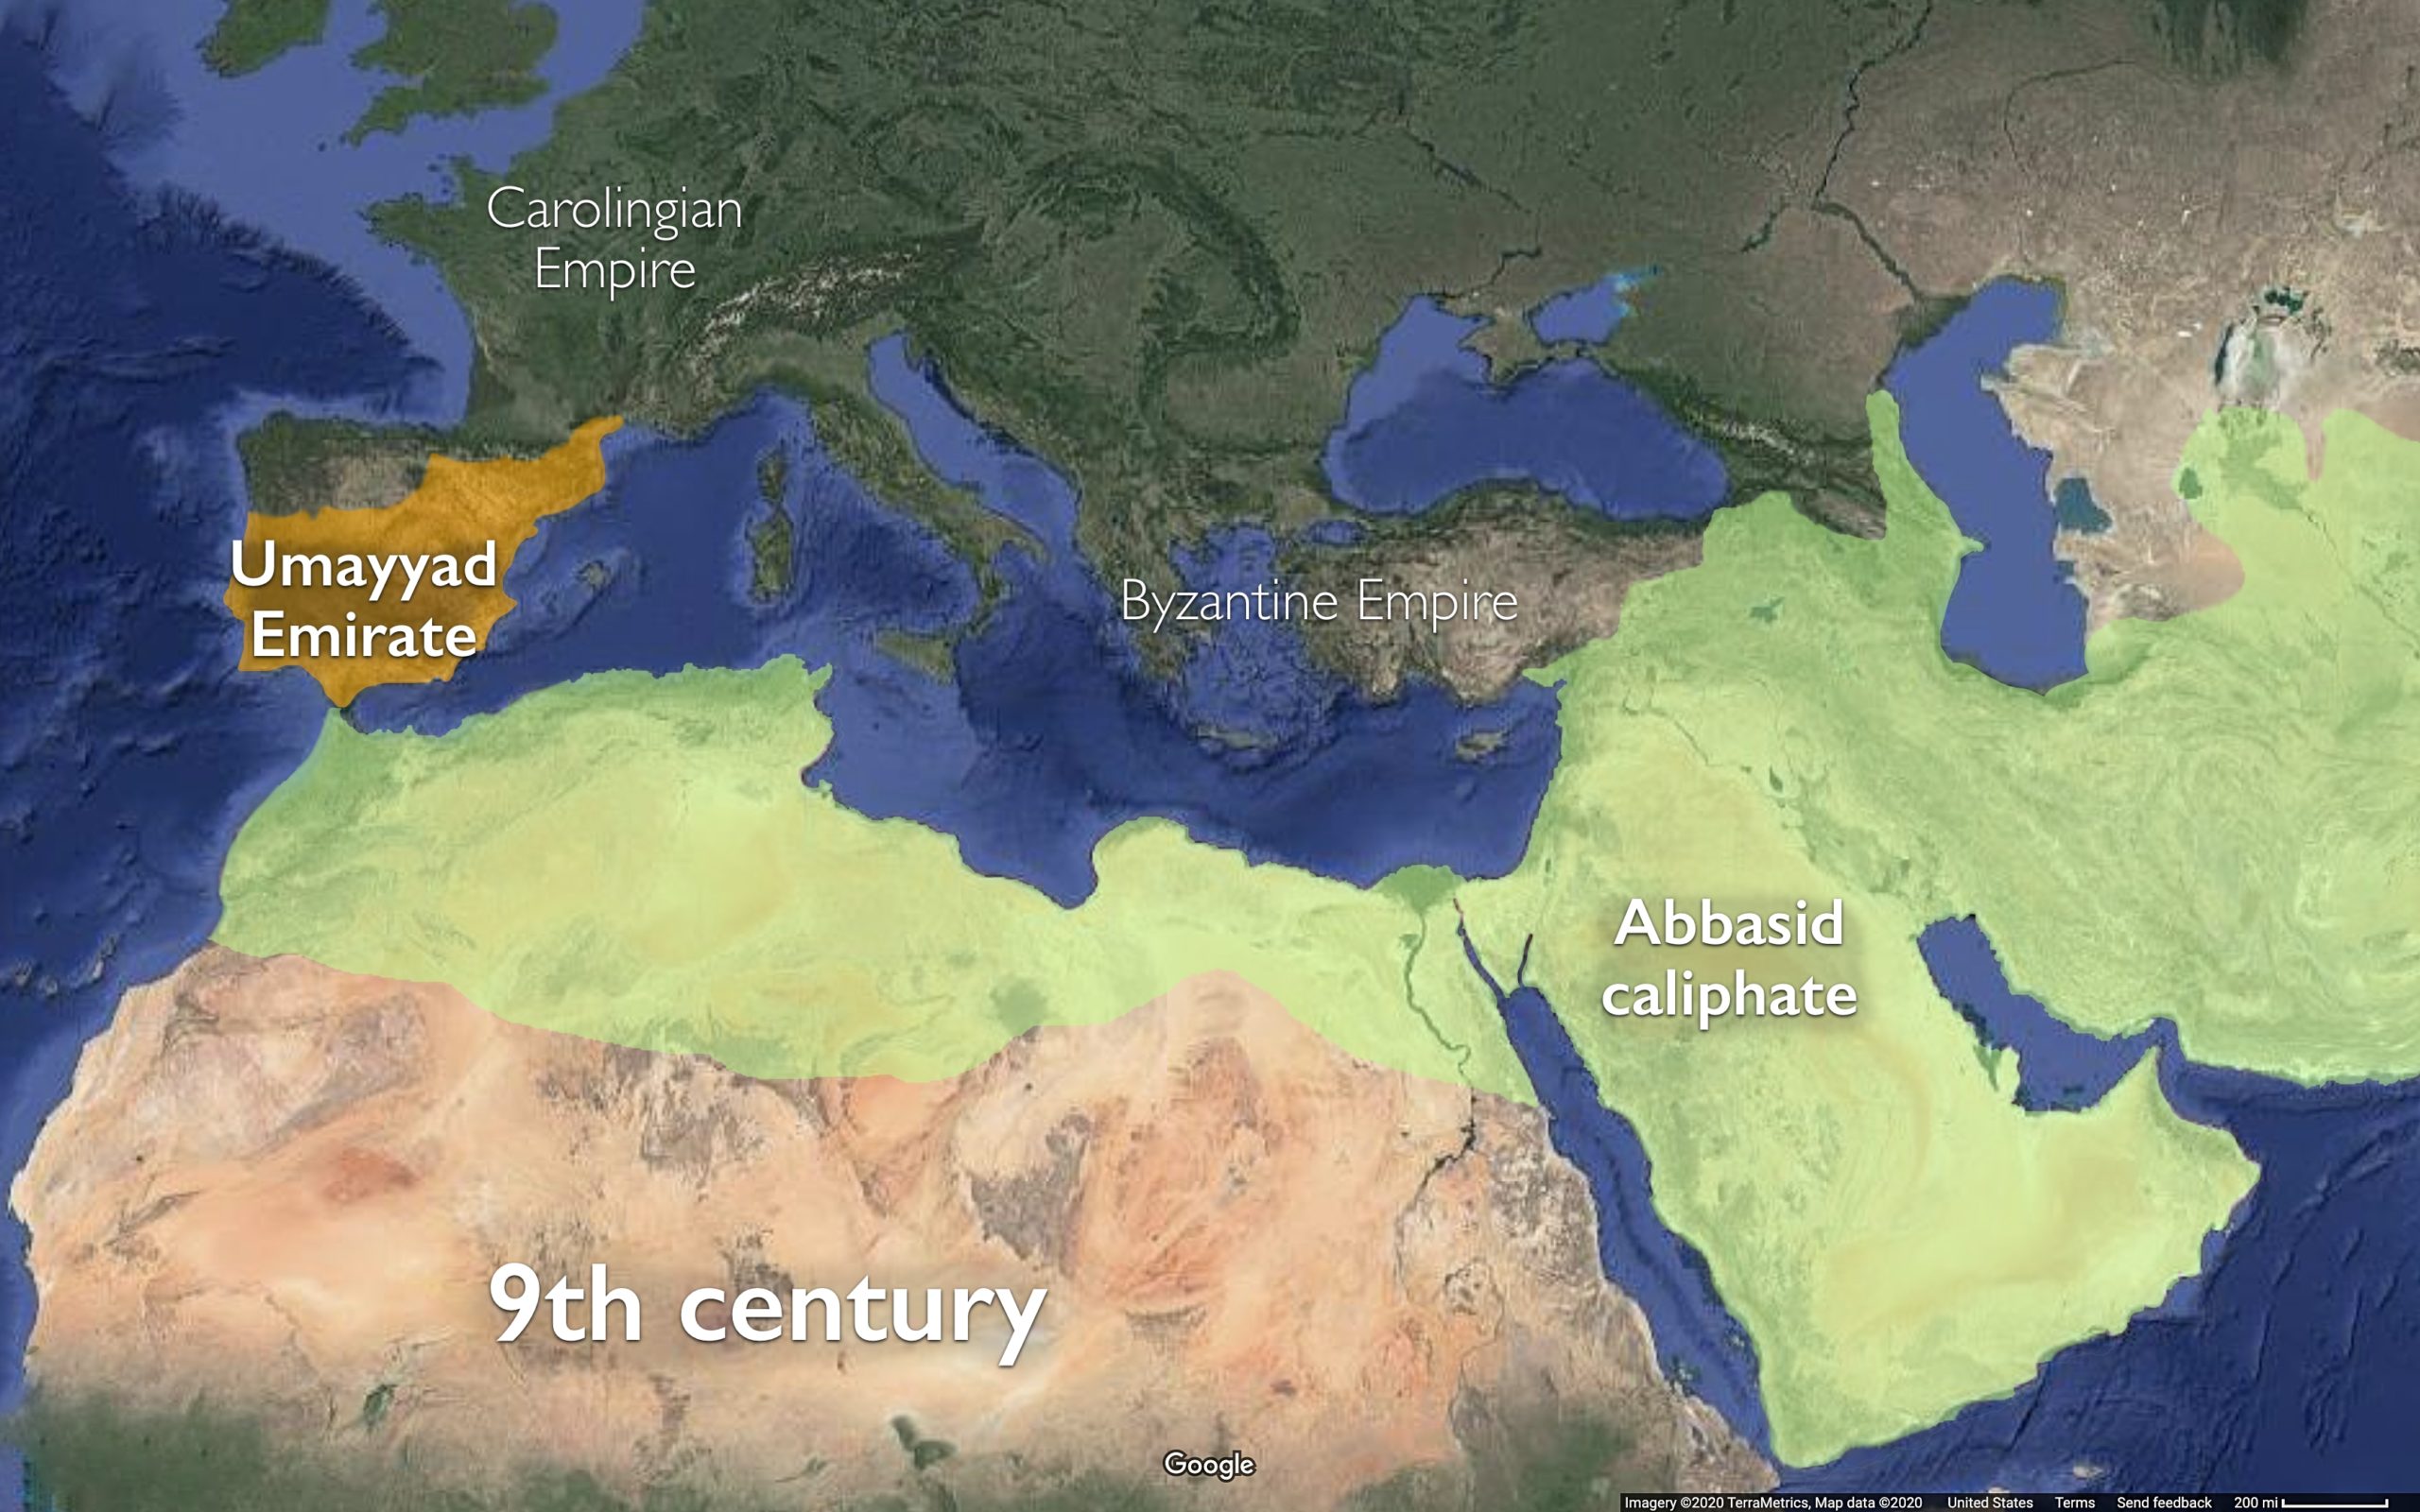 Map of the Mediterranean and west Asia in the 9th century